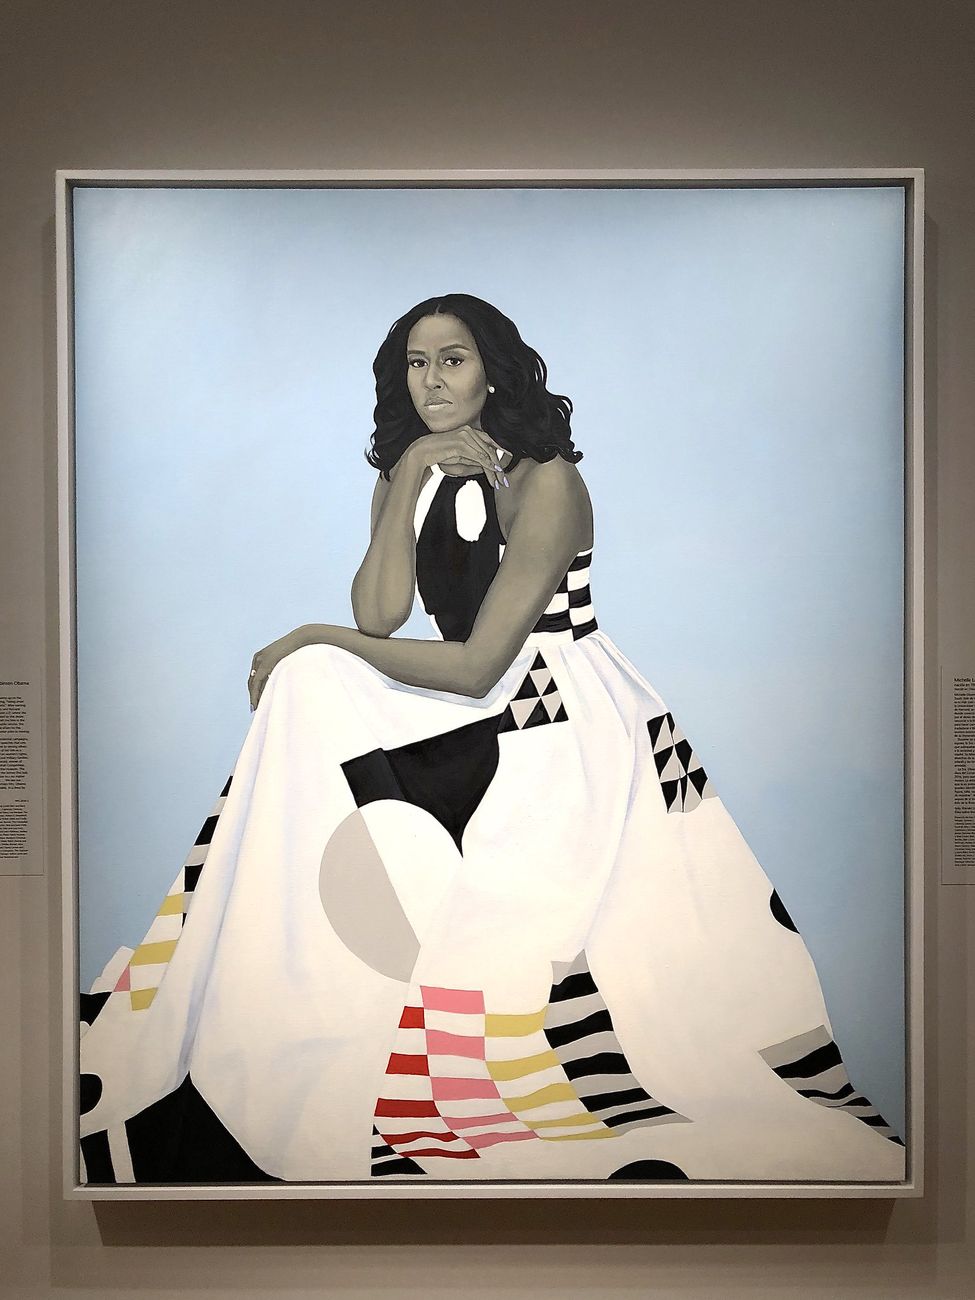 Amy Sherald, First Lady Michelle Obama, 2018. National Portrait Gallery, Washington. Photo FaceMePLS CC BY 2.0 via Flickr